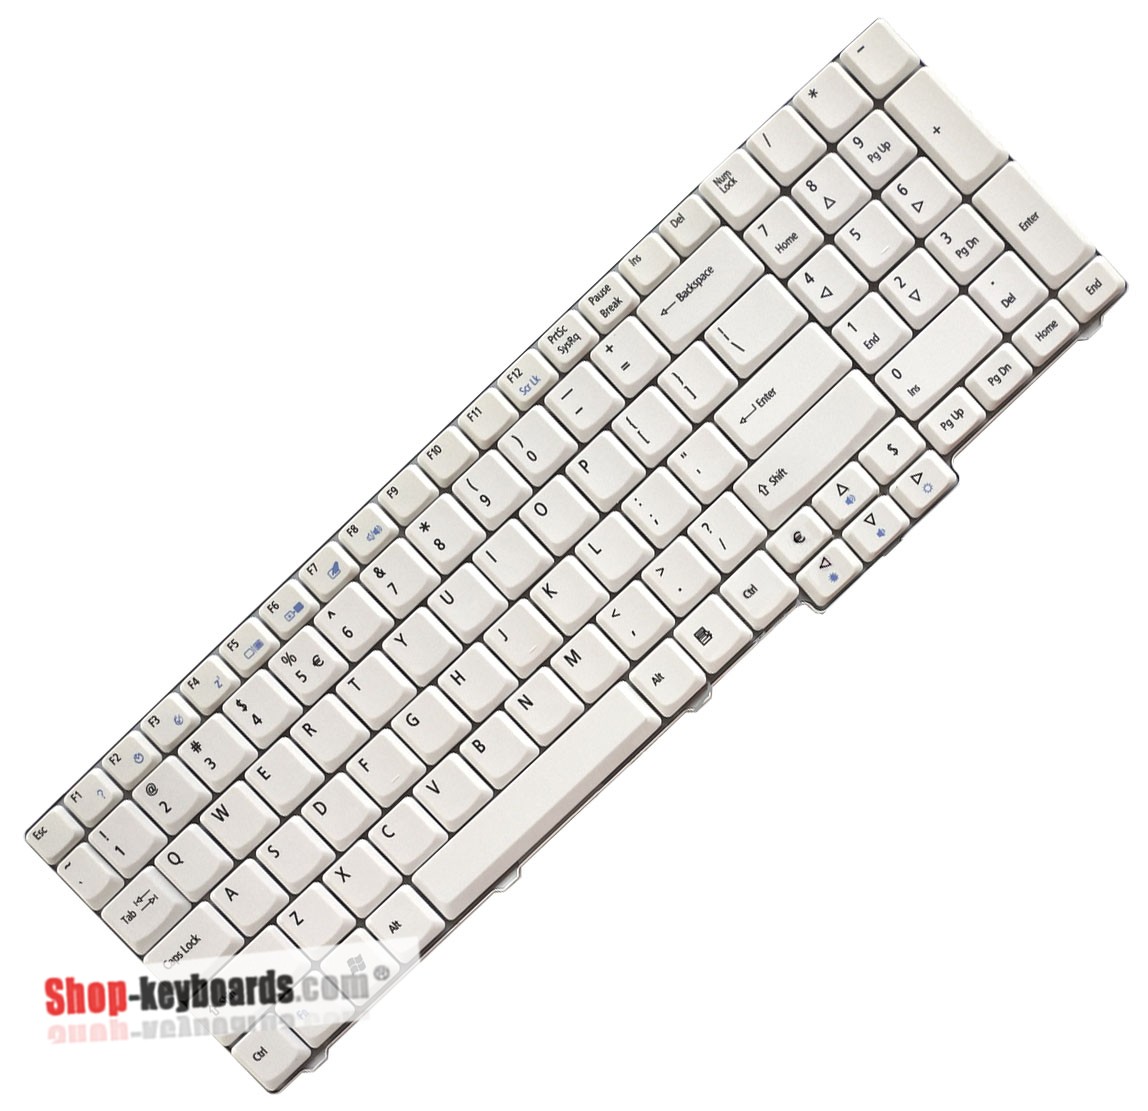 Acer Aspire 8730ZG-644G32Mn Keyboard replacement